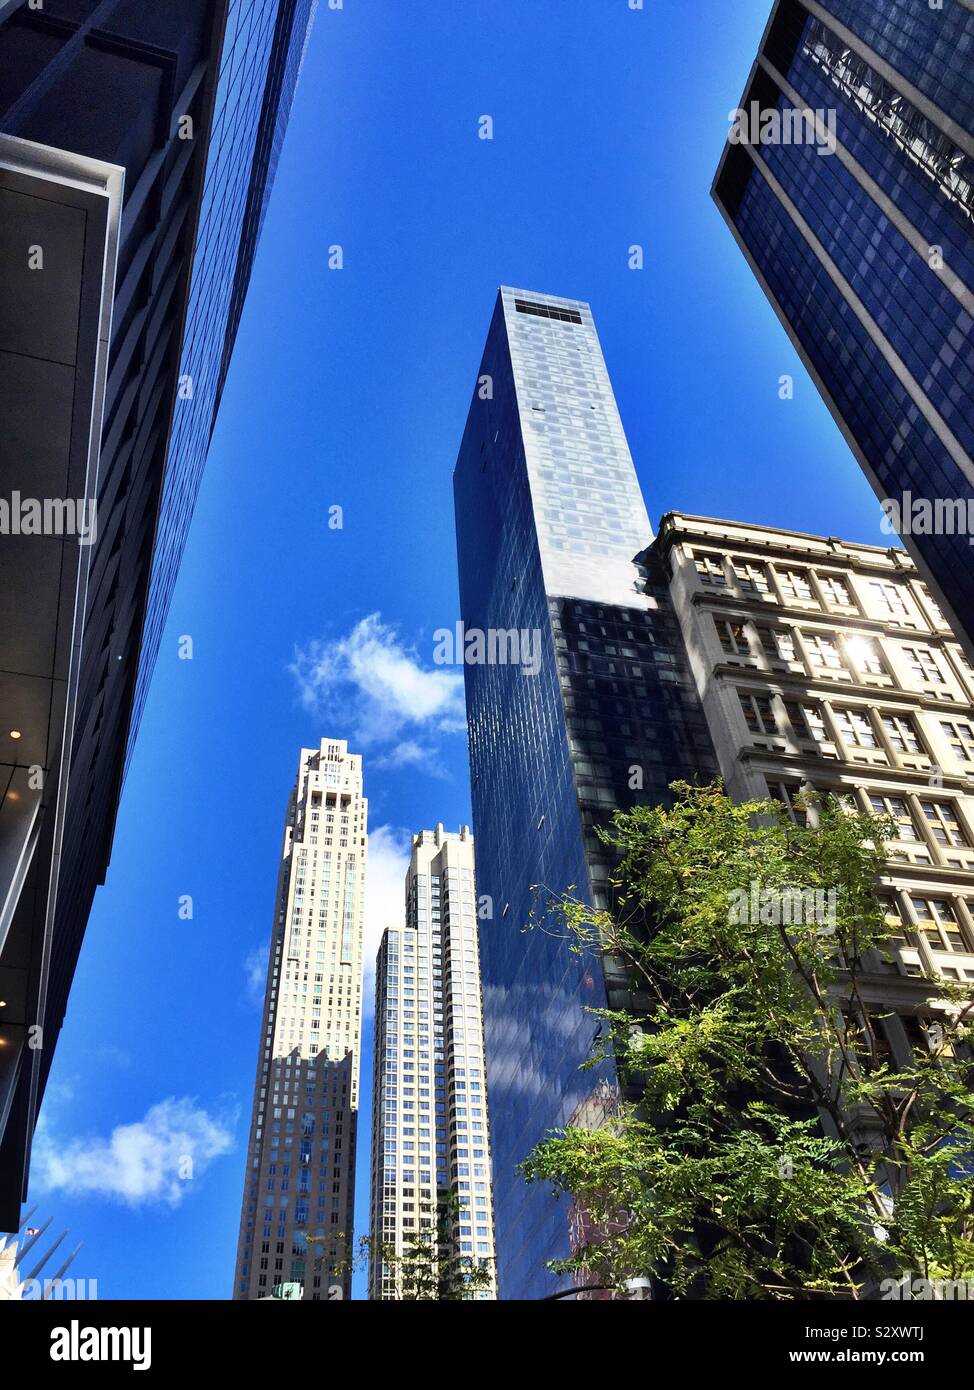 NEW YORK, USA - 17 MAY, 2019: Hilton hotels and resorts logo on the  building of Hilton in New York USA Stock Photo